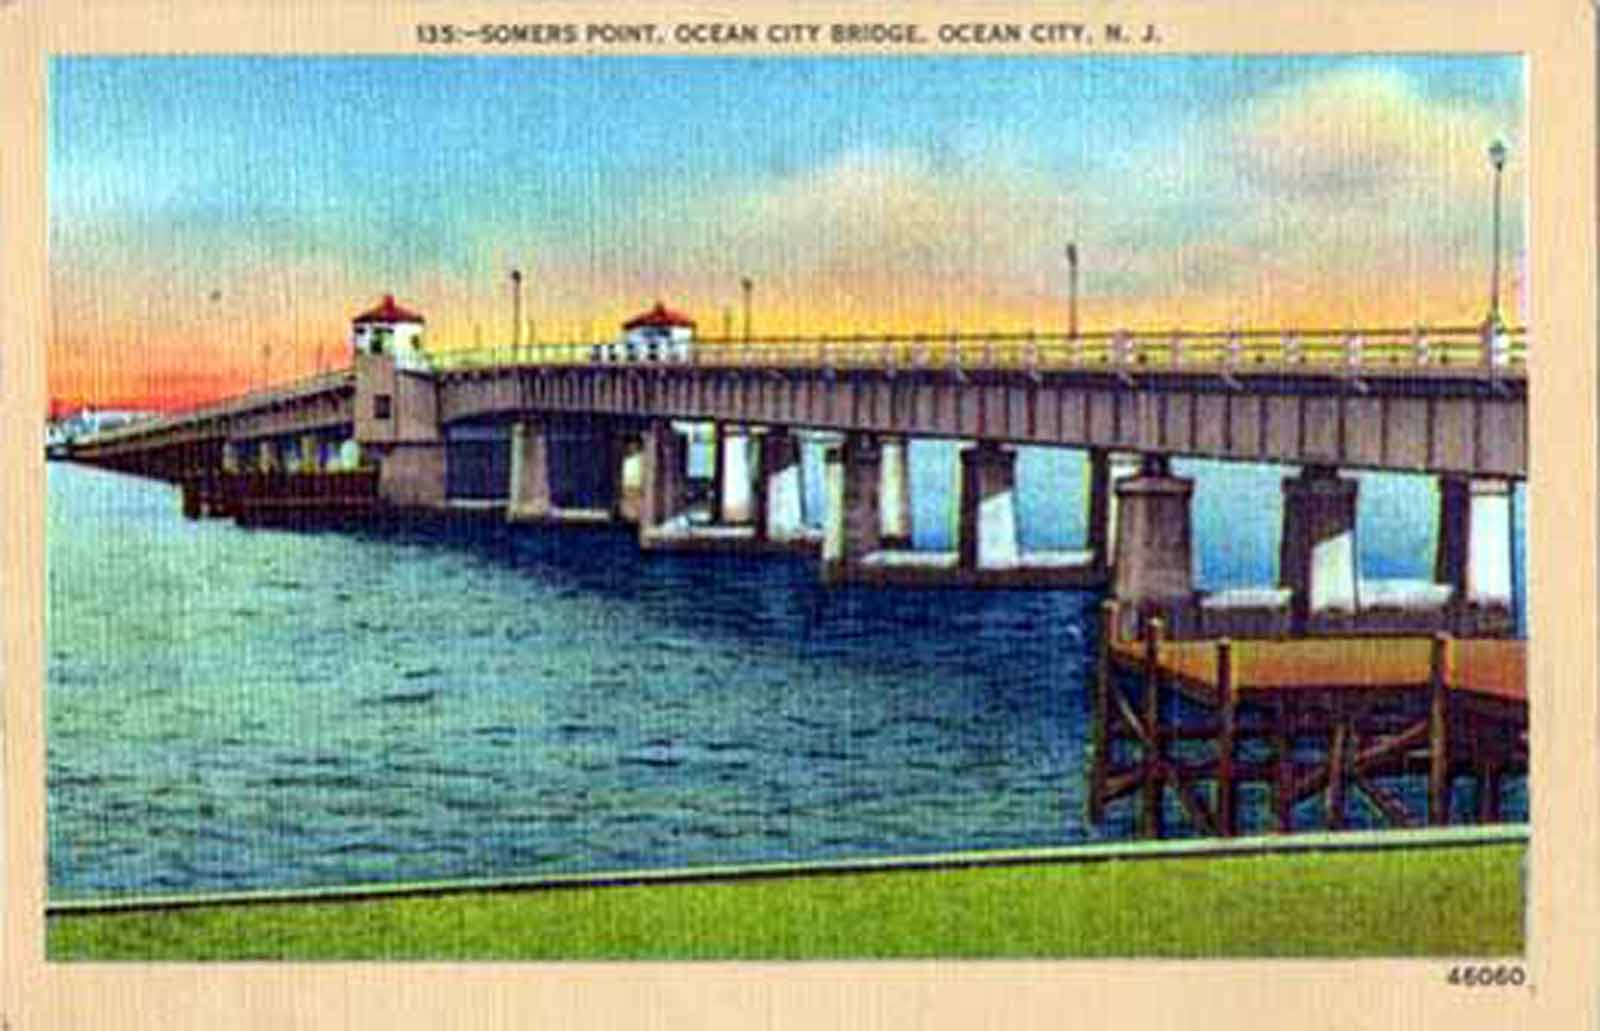 Somers Point - Somers Point to Ocean City Bridge - 1940